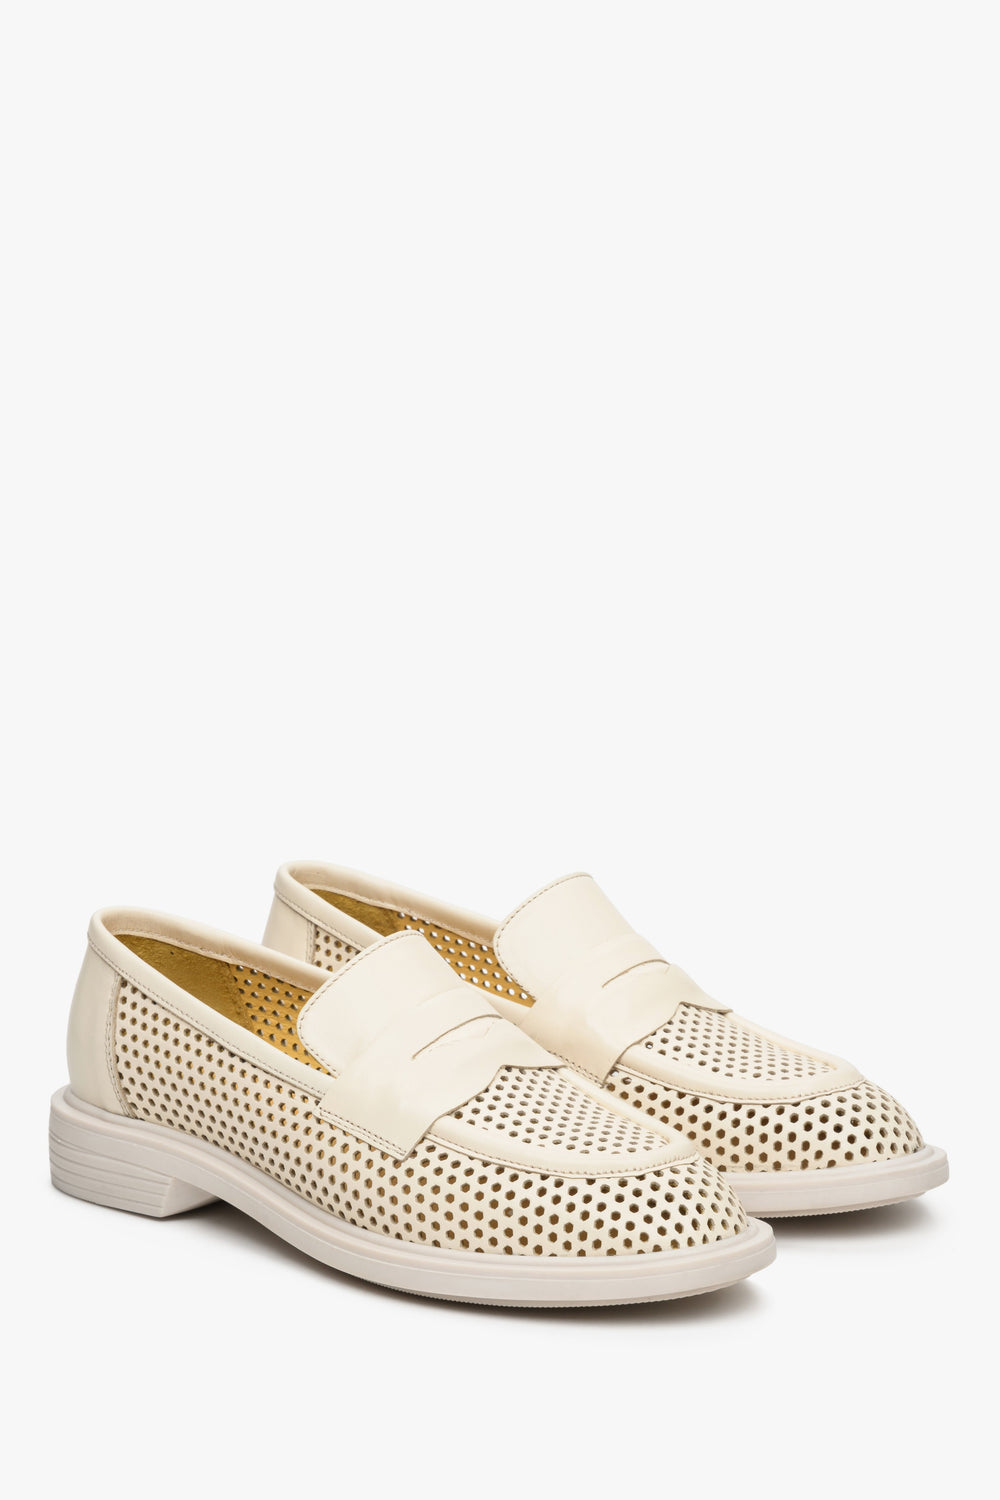 Women's light beige fall/spring loafers with perforation -presentation of the toe and side vamp.